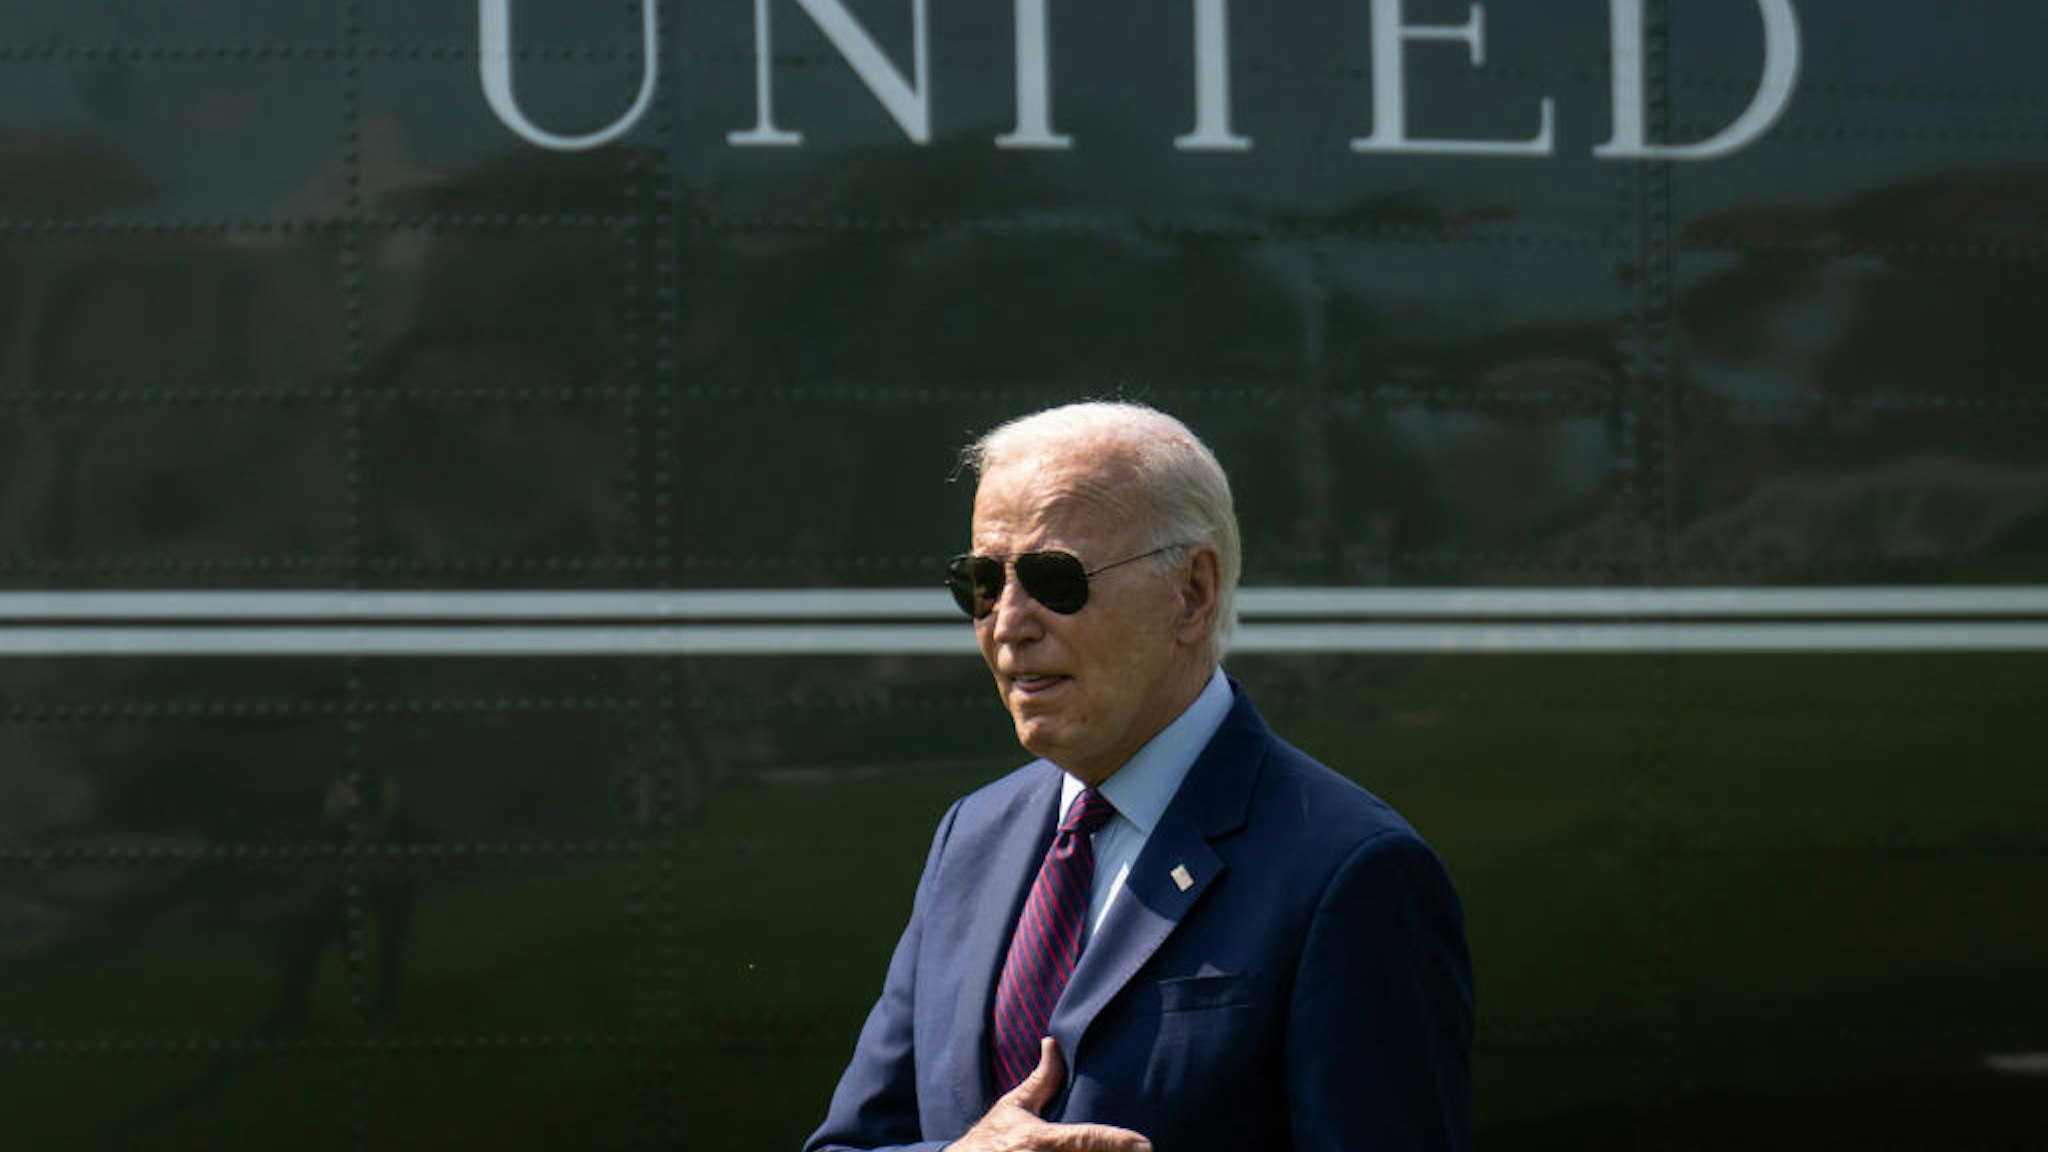 WASHINGTON, DC - JULY 28: U.S. President Joe Biden gestures toward visitors watching the departure as he walks to Marine One on the South Lawn of the White House July 28, 2023 in Washington, DC. President Biden is traveling to Auburn, Maine to discuss manufacturing and his "Bidenomics" economic plan.